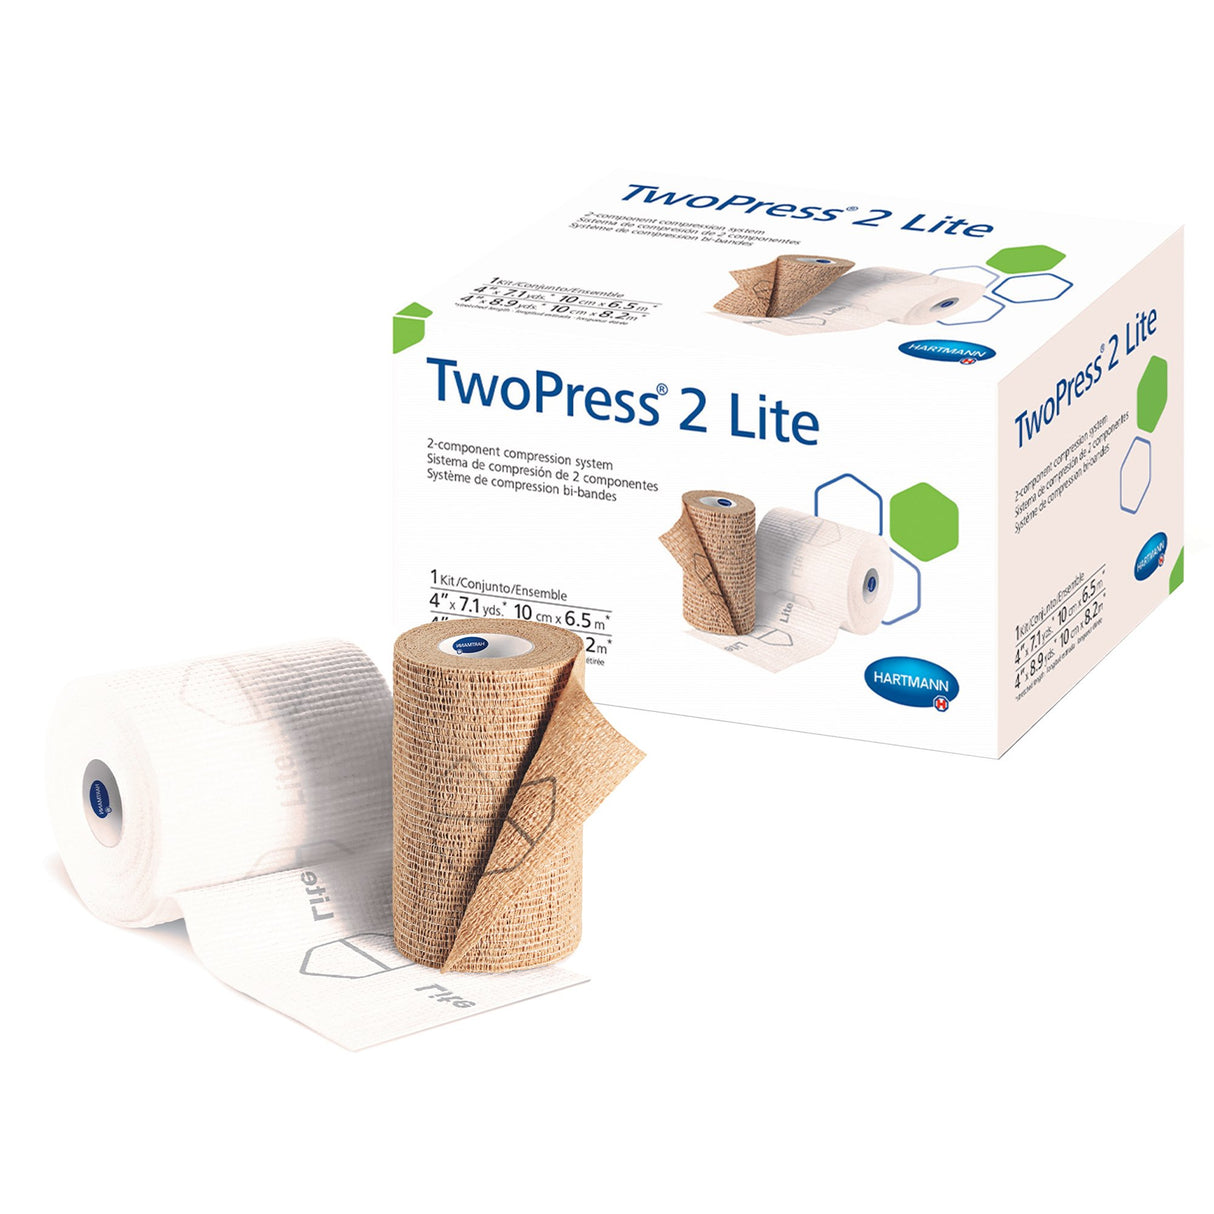 TwoPress® 2 Lite 2 Layer Compression Bandage System with Visible Indicators